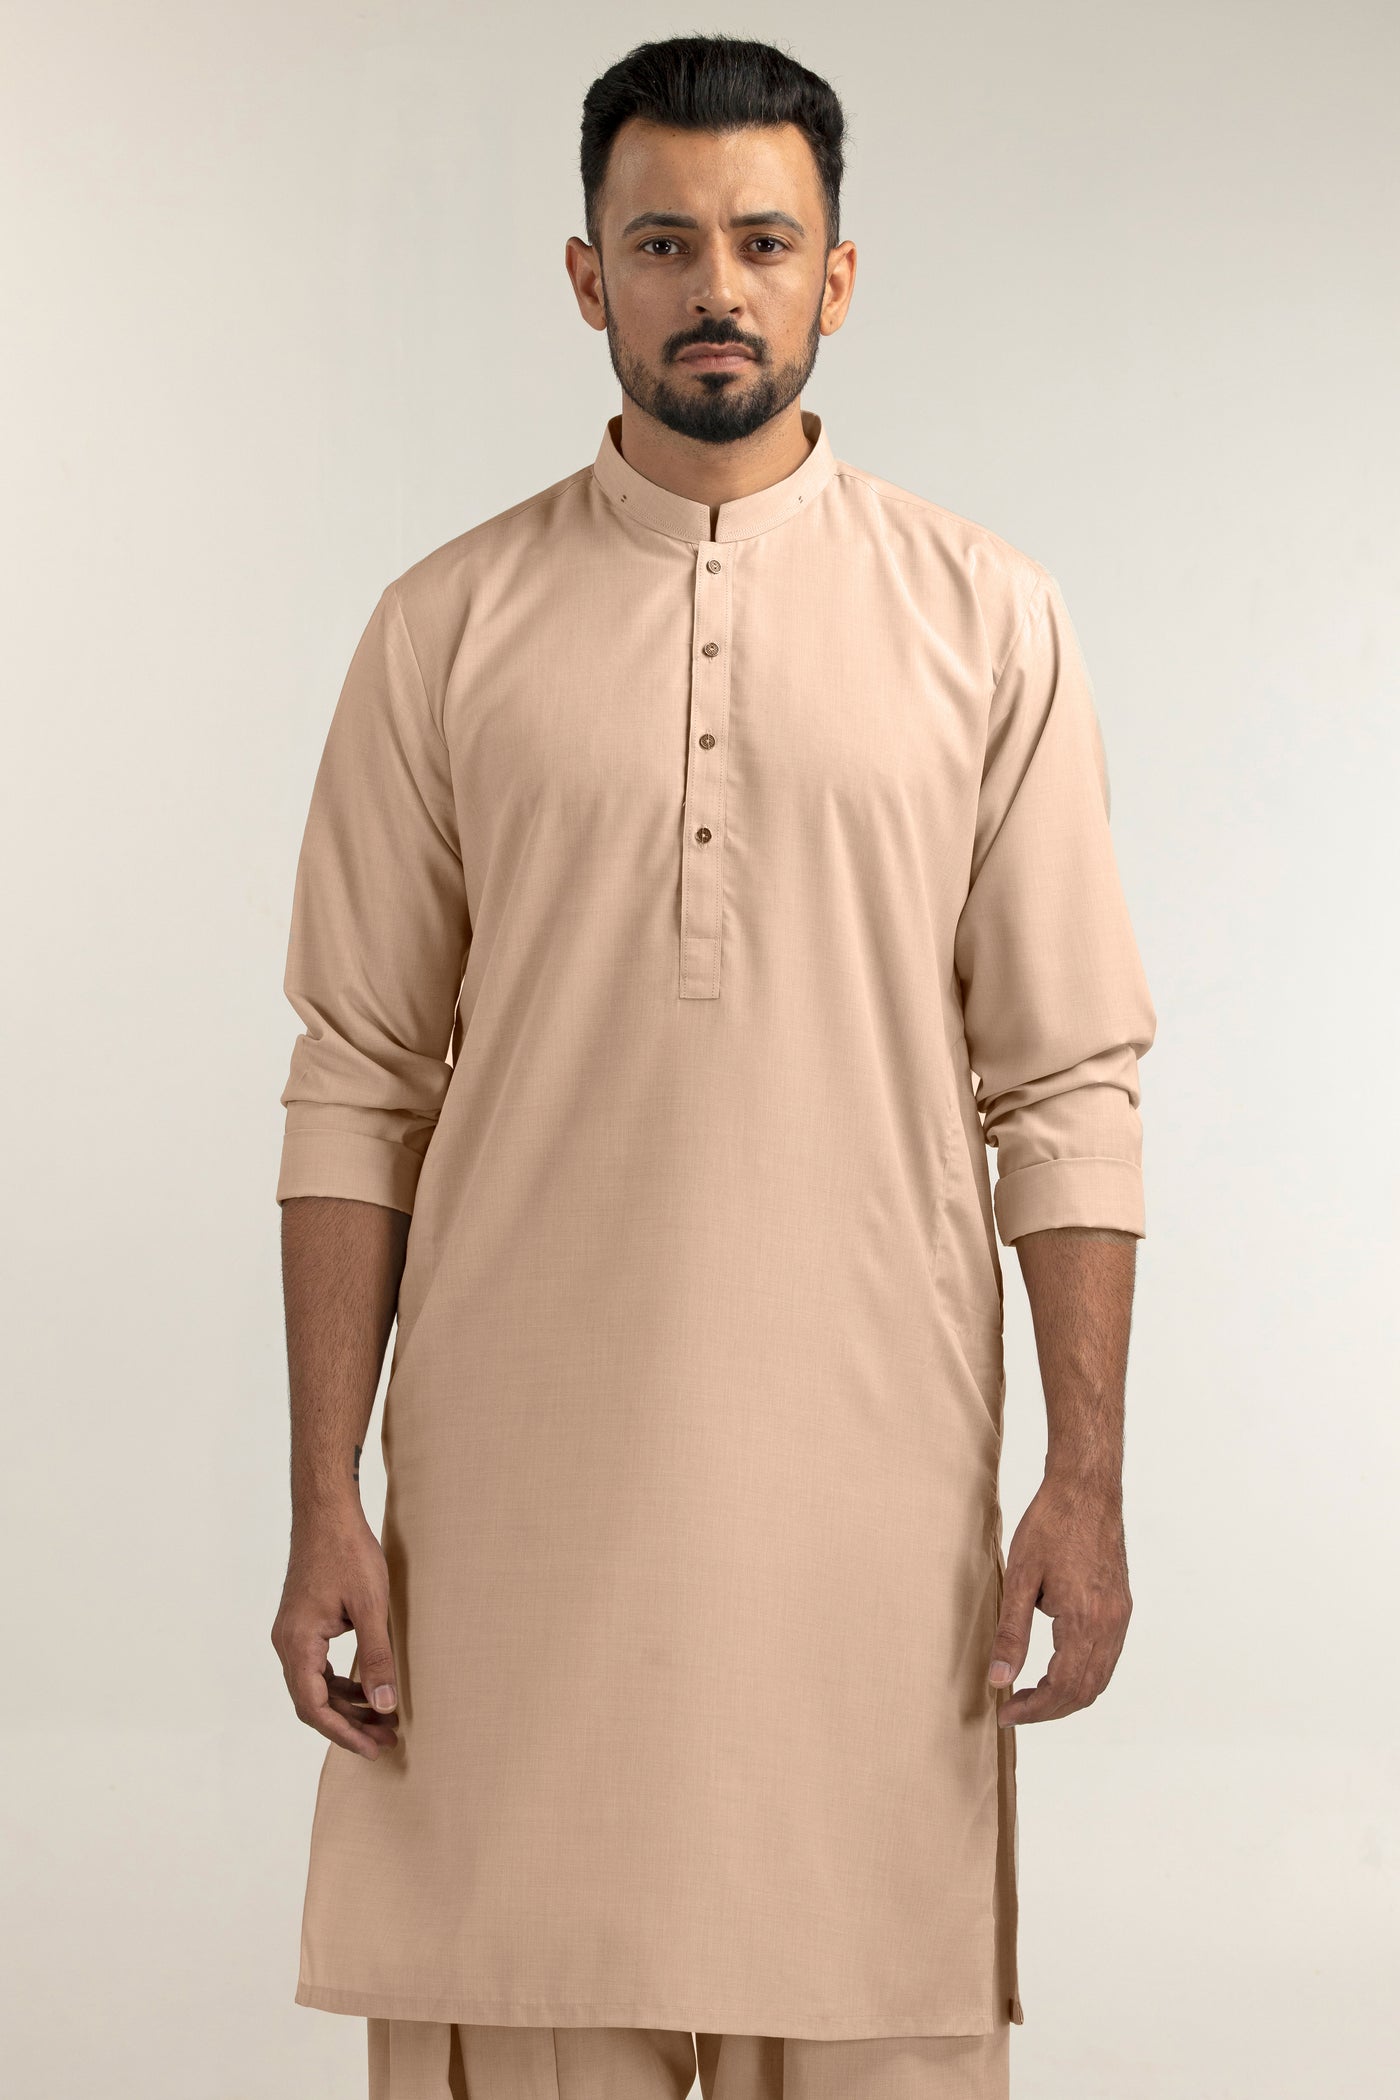 Gul Ahmed Ready to Wear Mens Suit - JN-18 A